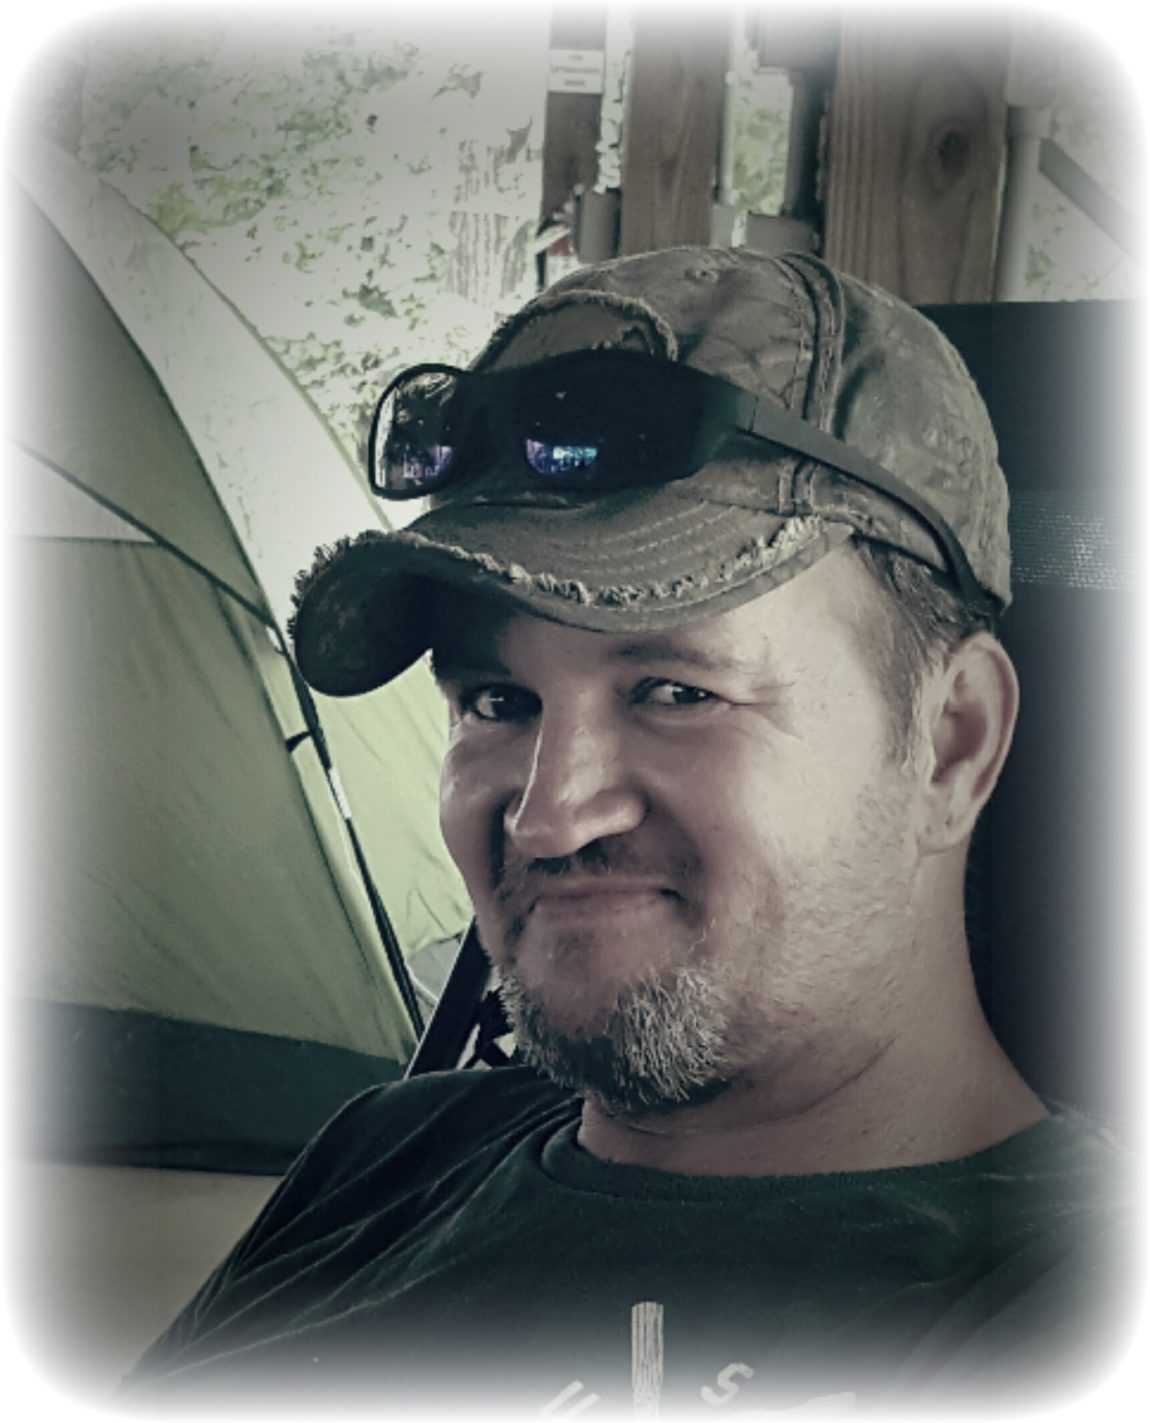 Shane Allen Wesley Johnson, 46 A Natural State Funeral Service